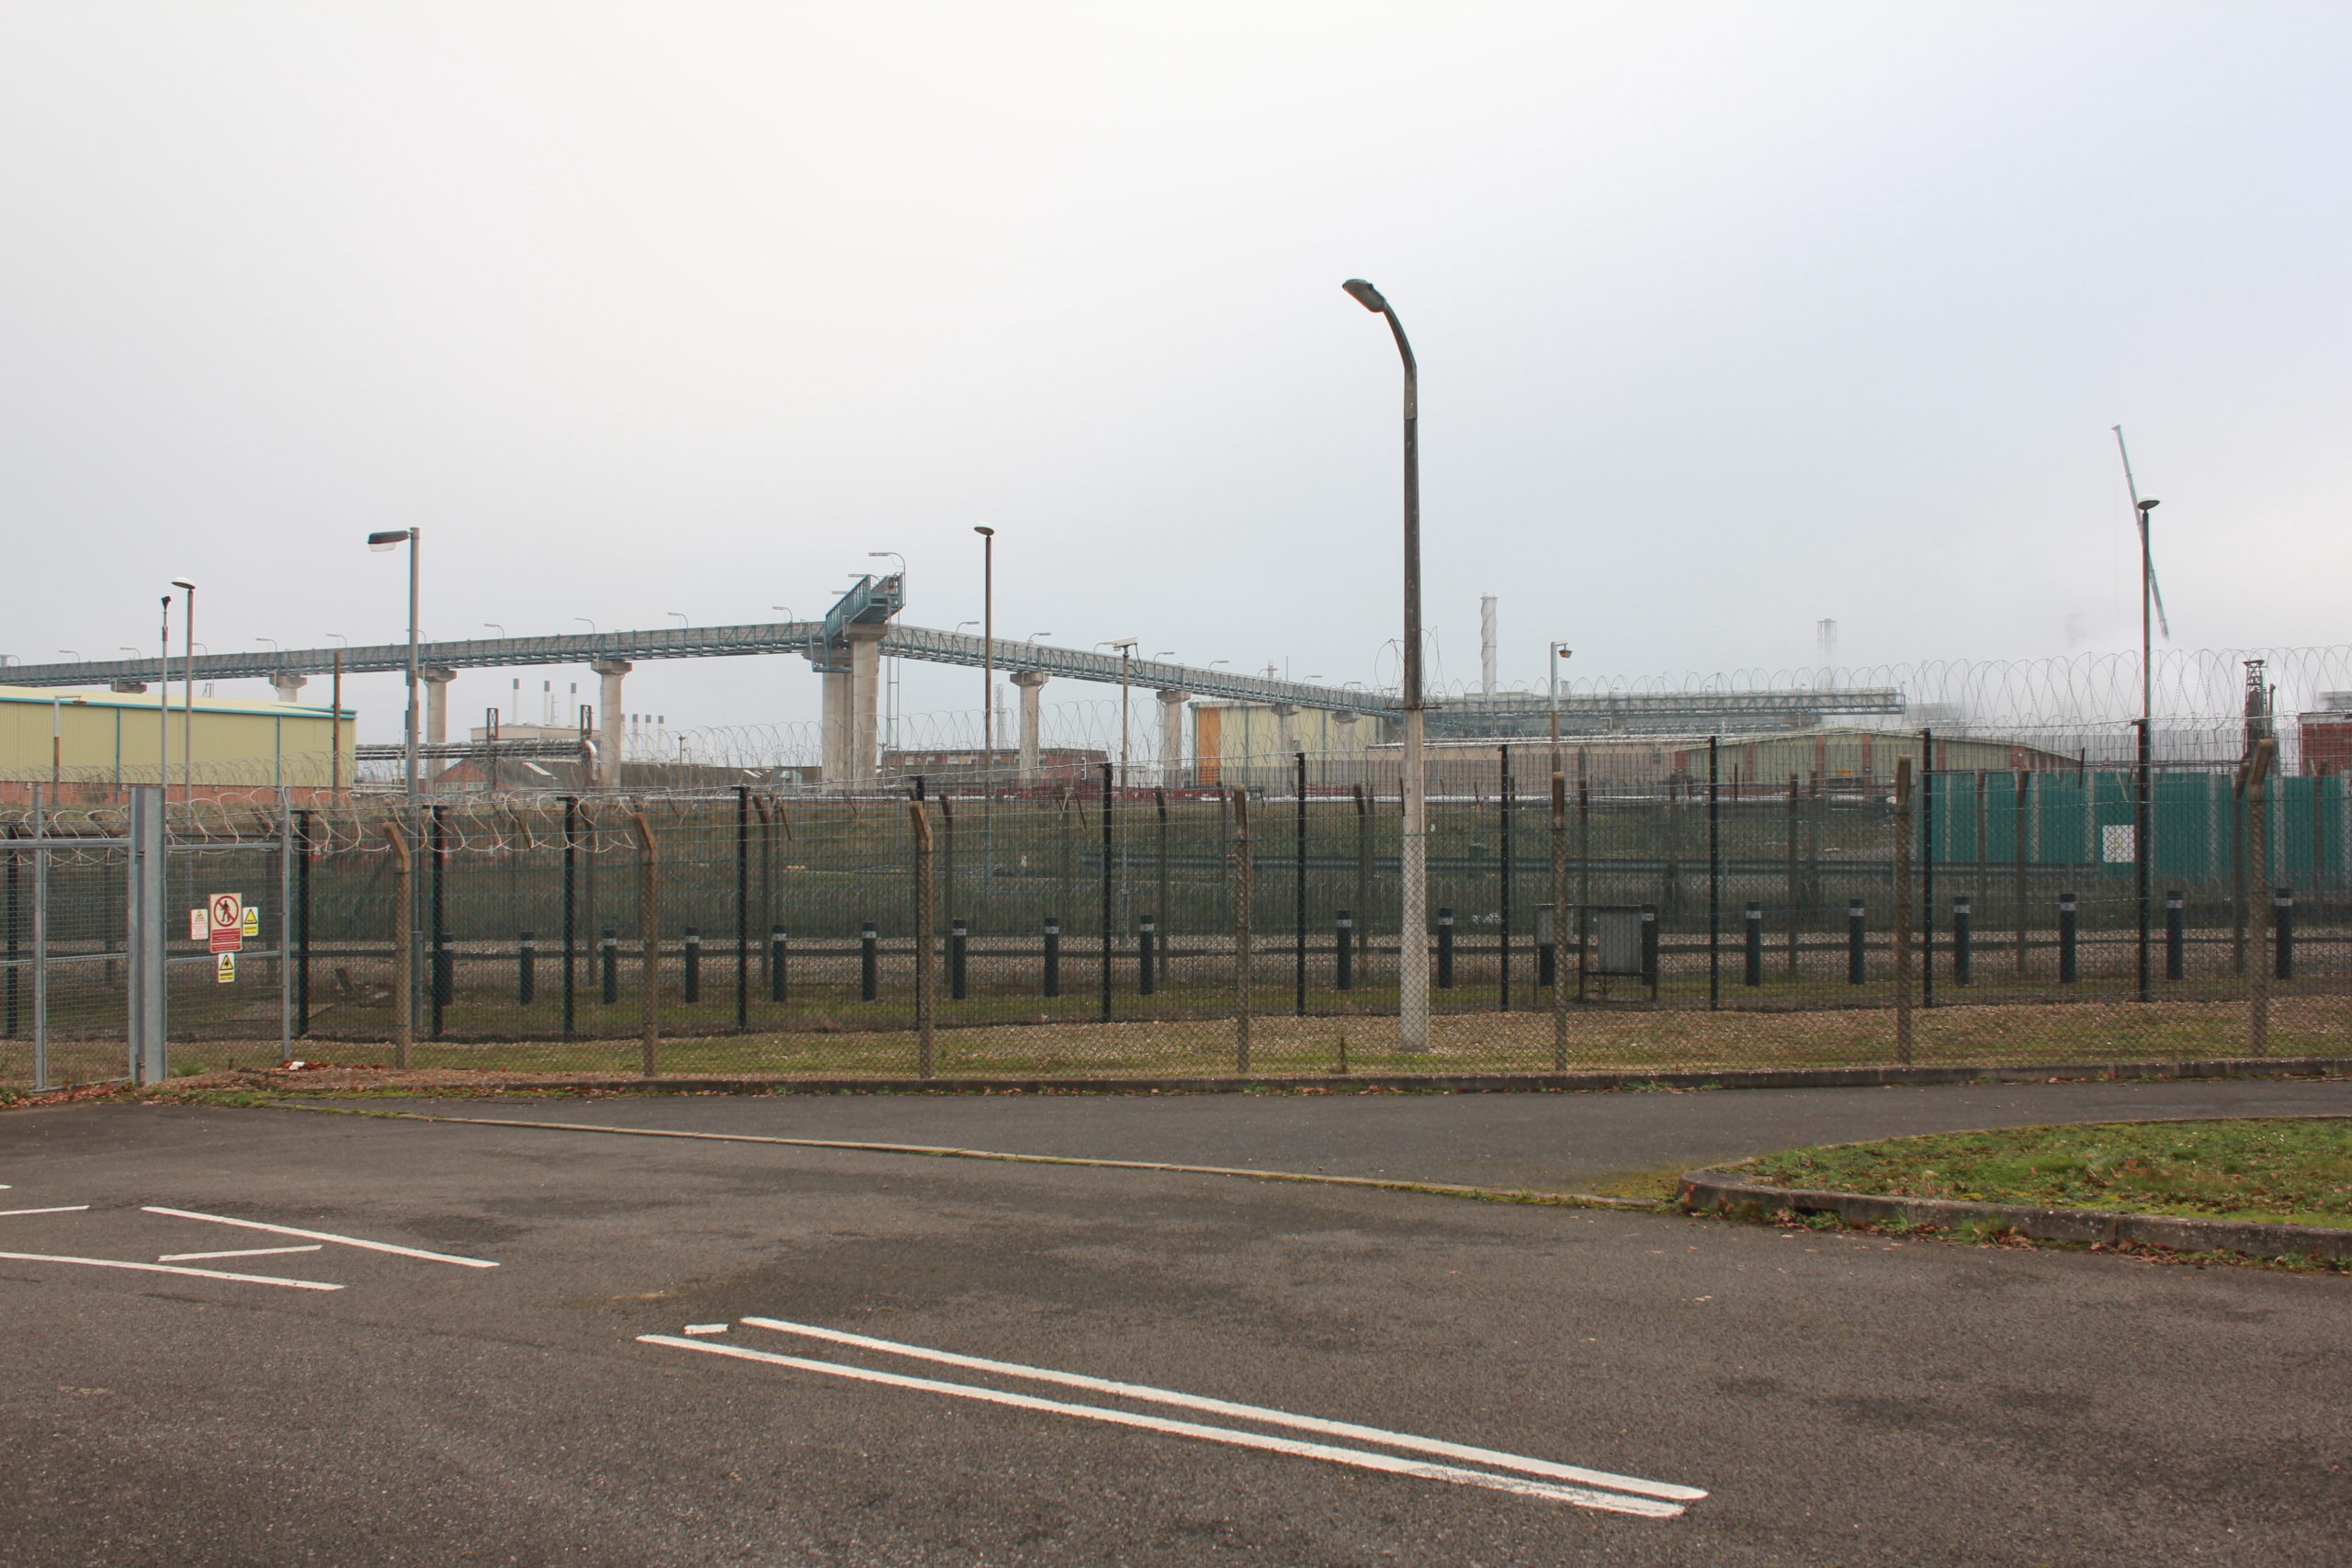 External view of the Citadel, Aldermaston, showing part of the waste management complex